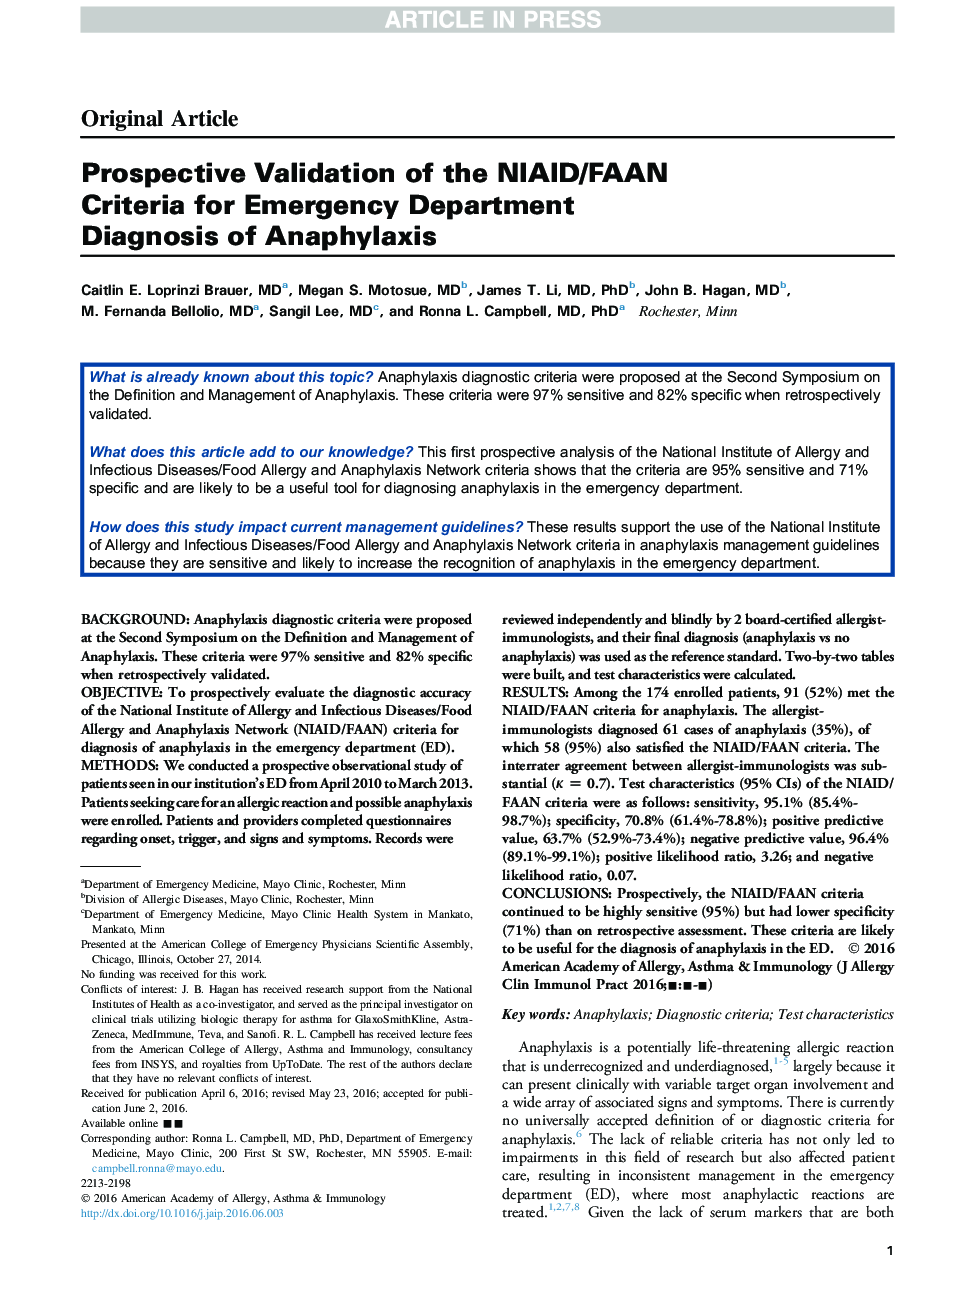 Prospective Validation of the NIAID/FAAN CriteriaÂ for Emergency Department Diagnosis of Anaphylaxis